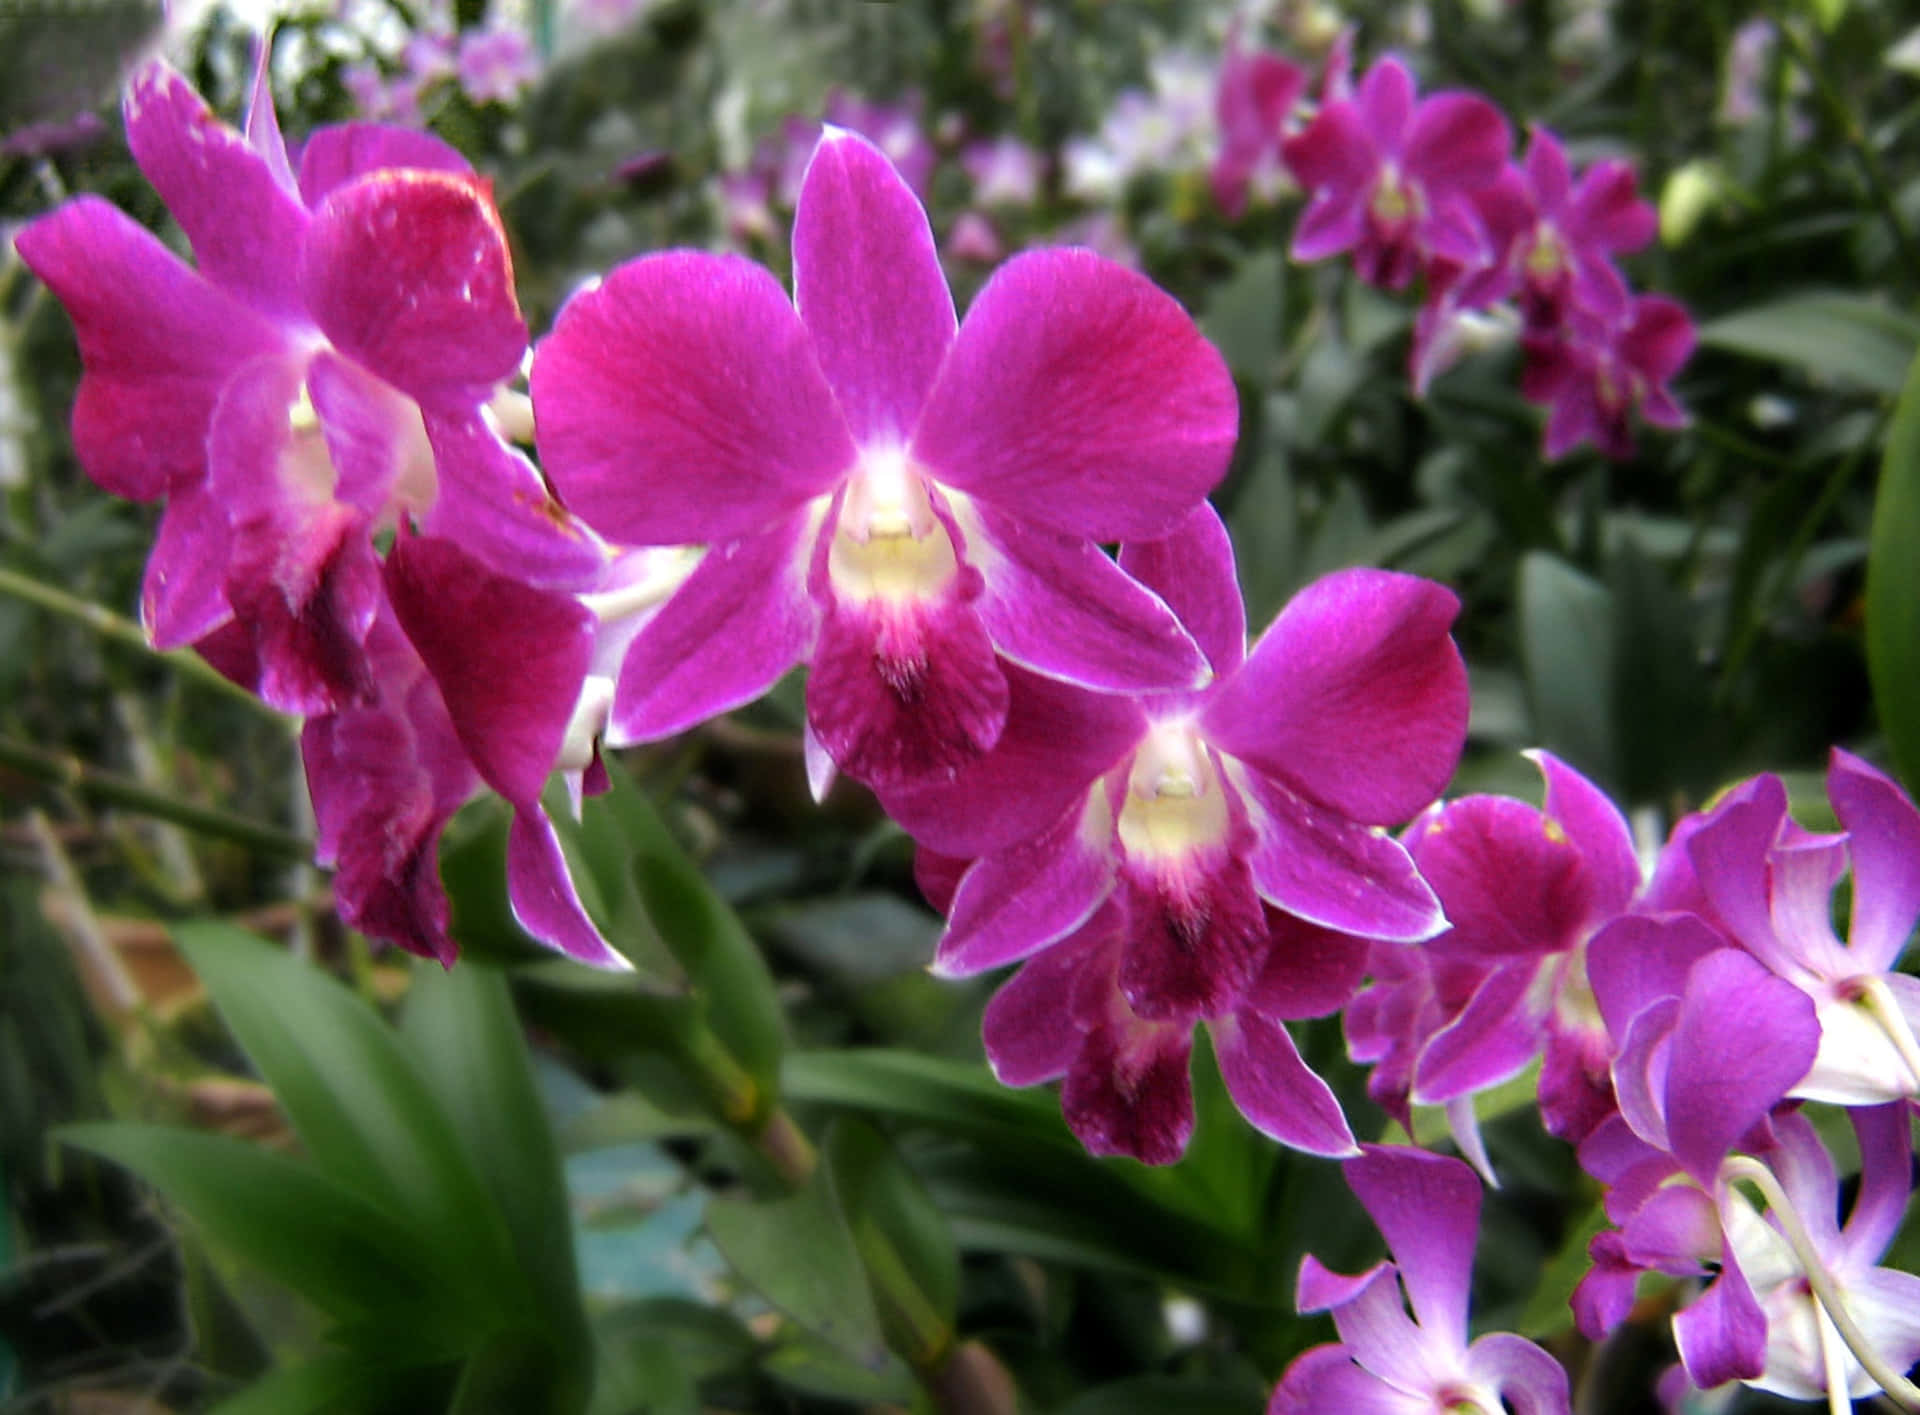 A delicate pink orchid, with bright yellow markings.